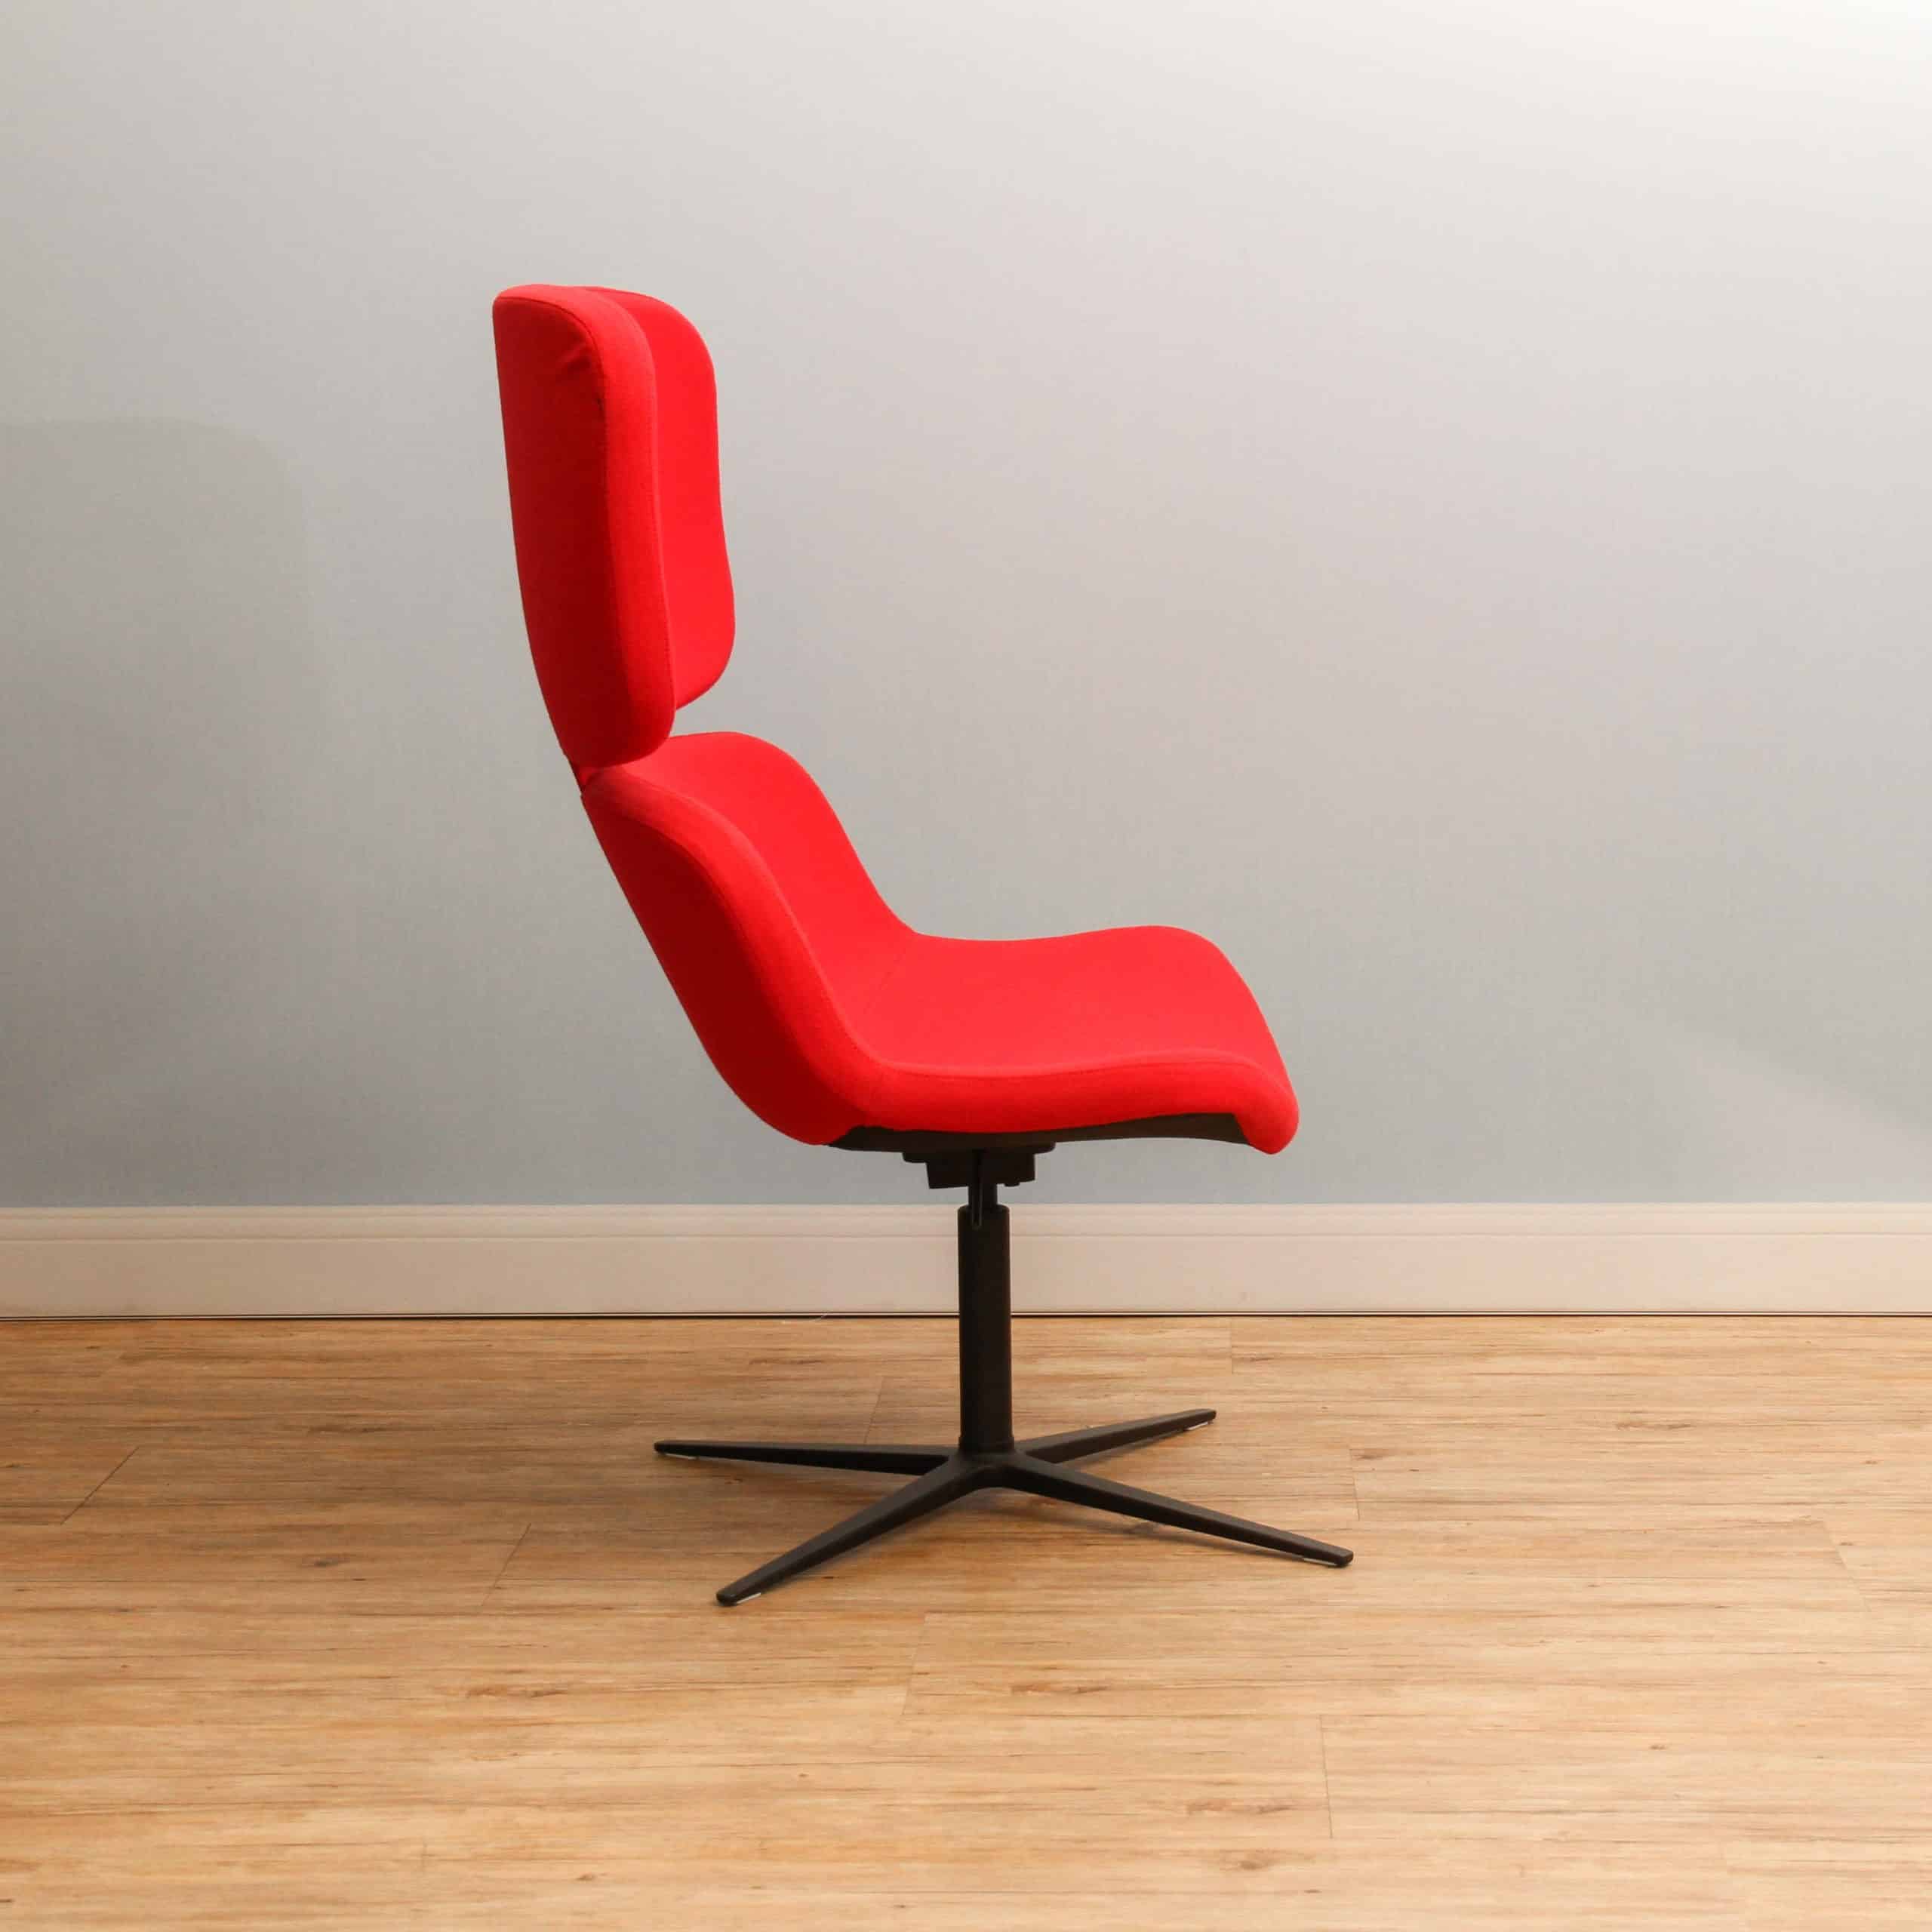 WAGNER - W-Lounge Chair 3 4-Fuss schwarz/Wolle rot